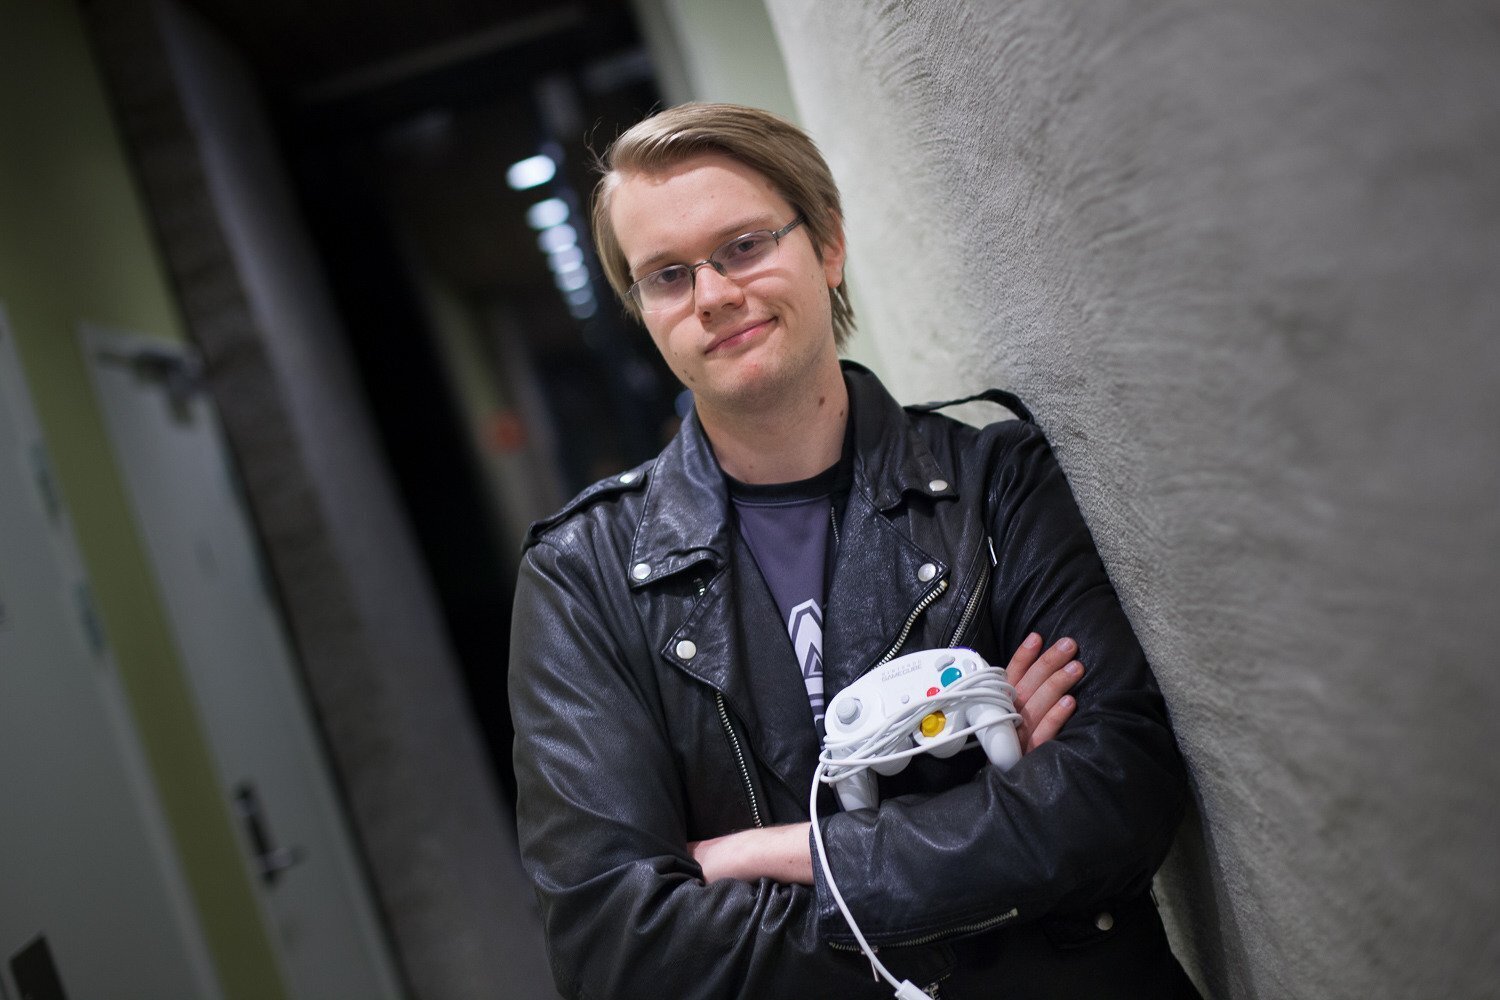 Throughout his singles career, Armada walked away with 21 majors and managed to hold the title of “best ranked player” for four years.